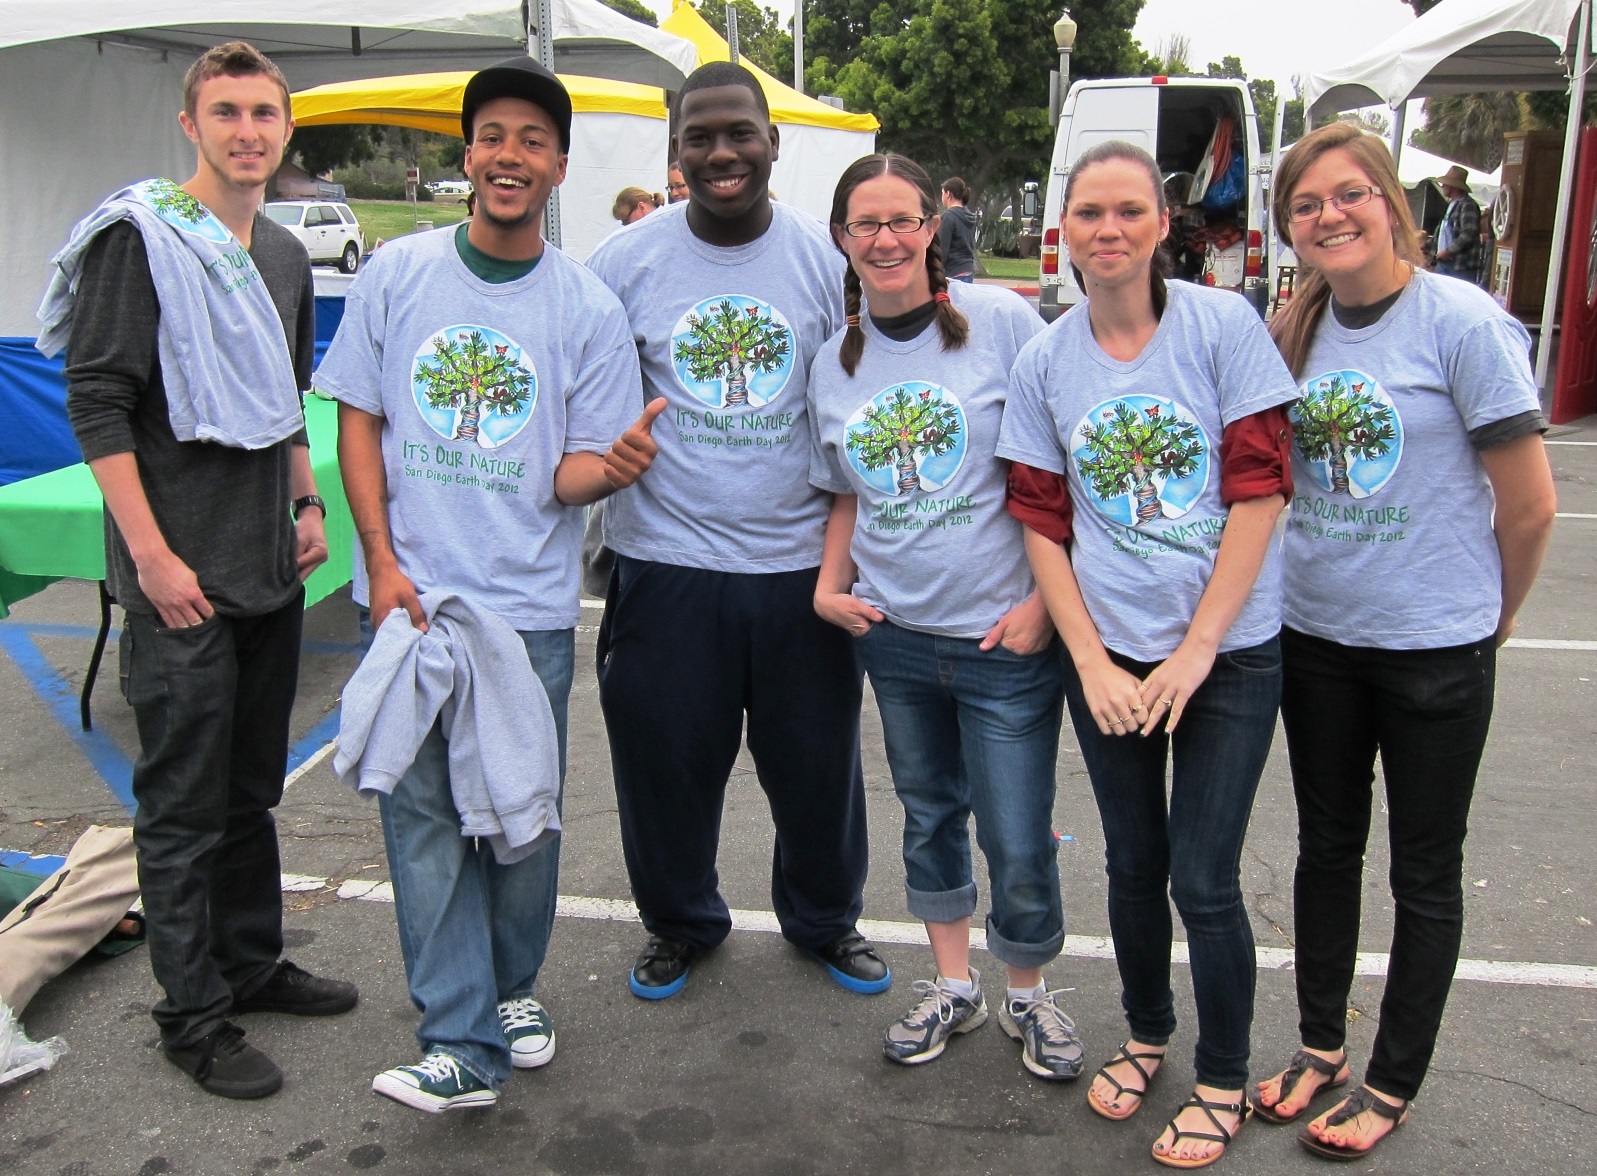 This year, 400 volunteers are being recruited to keep EarthFair’s low-emission motor humming.